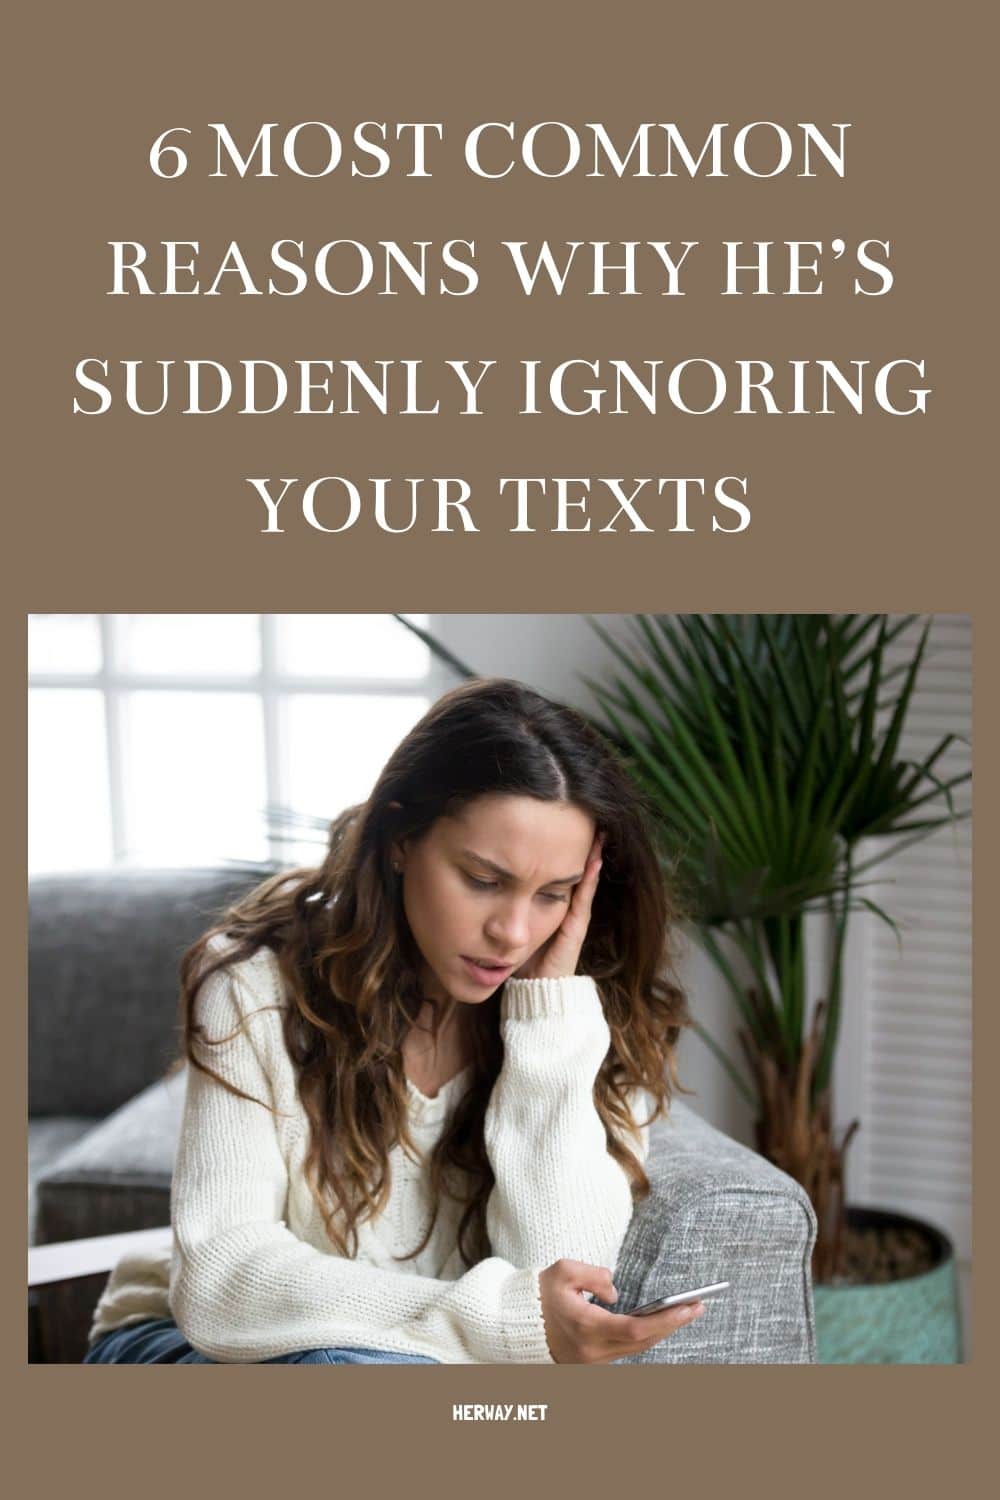 6 Most Common Reasons Why He’s Suddenly Ignoring Your Texts